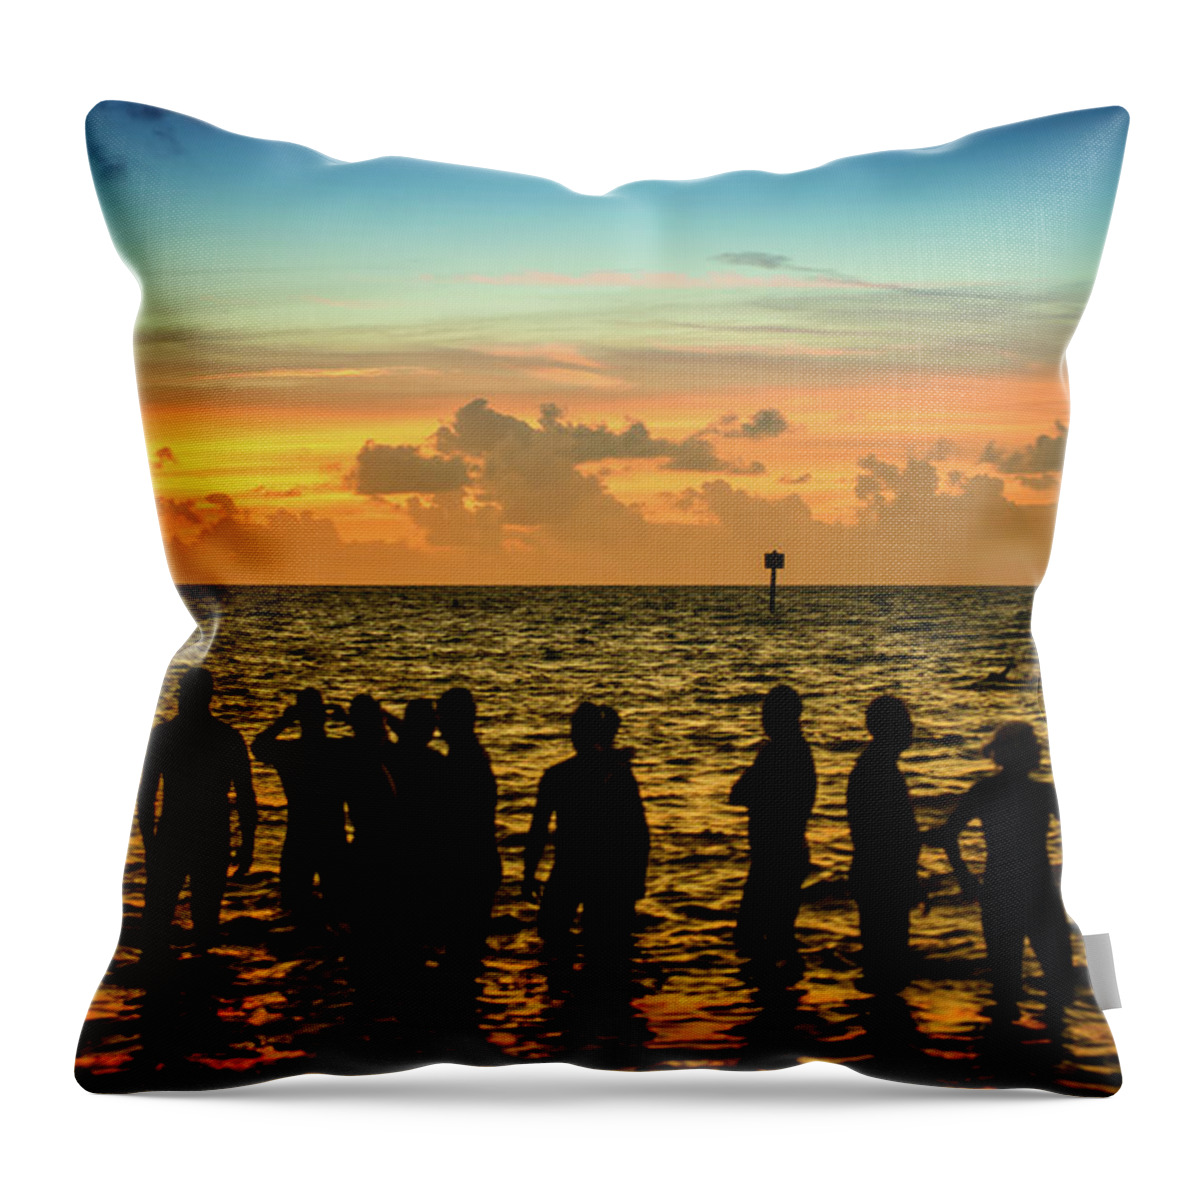 Landscape Throw Pillow featuring the photograph Swimmers Sunrise by Joe Shrader